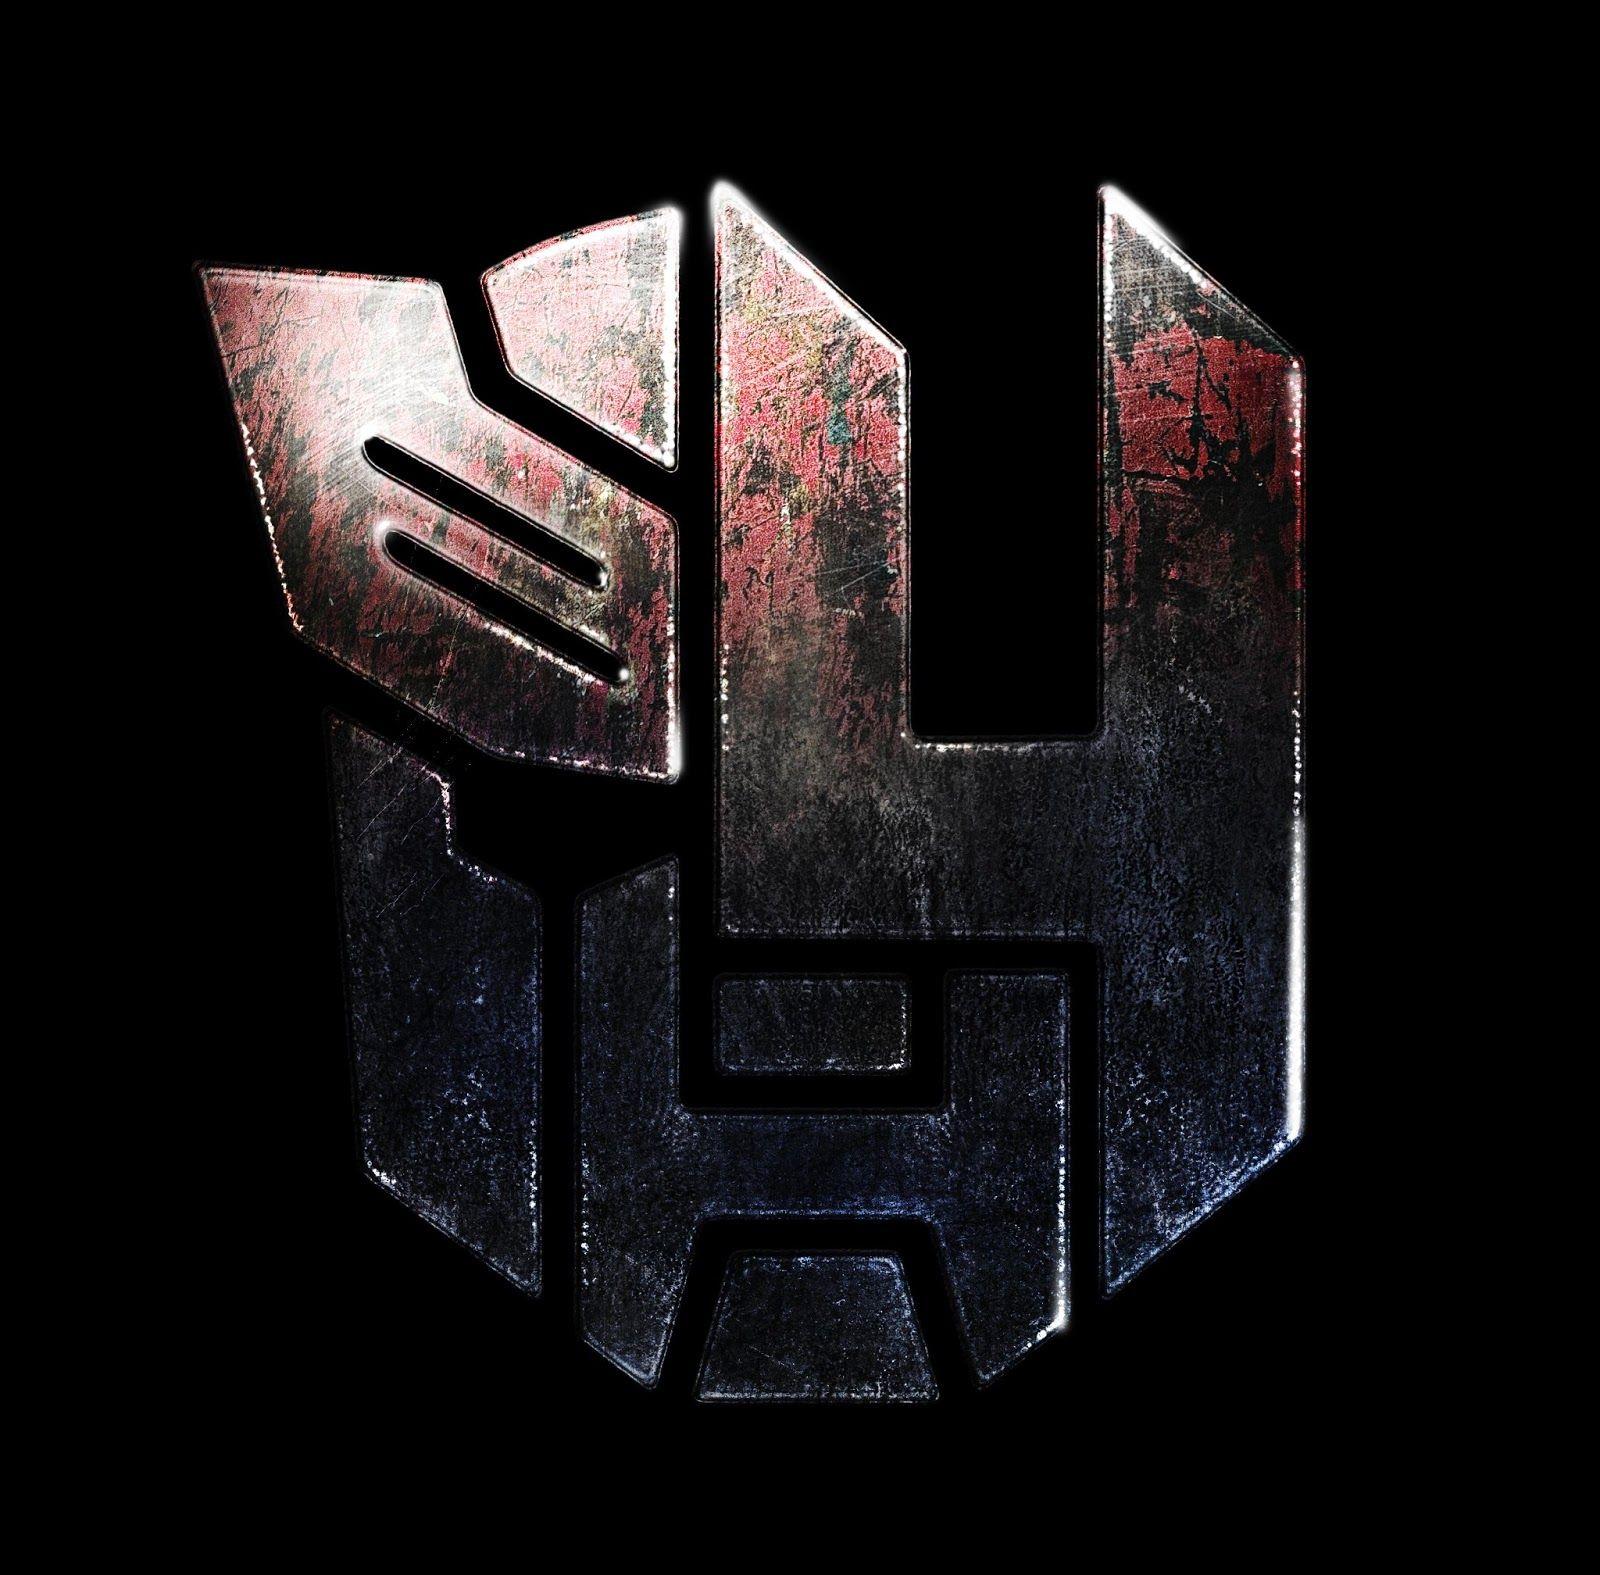 Transformers 4 Autobot Logo - Transformers Live Action Movie Blog (TFLAMB): Names of Two New ...